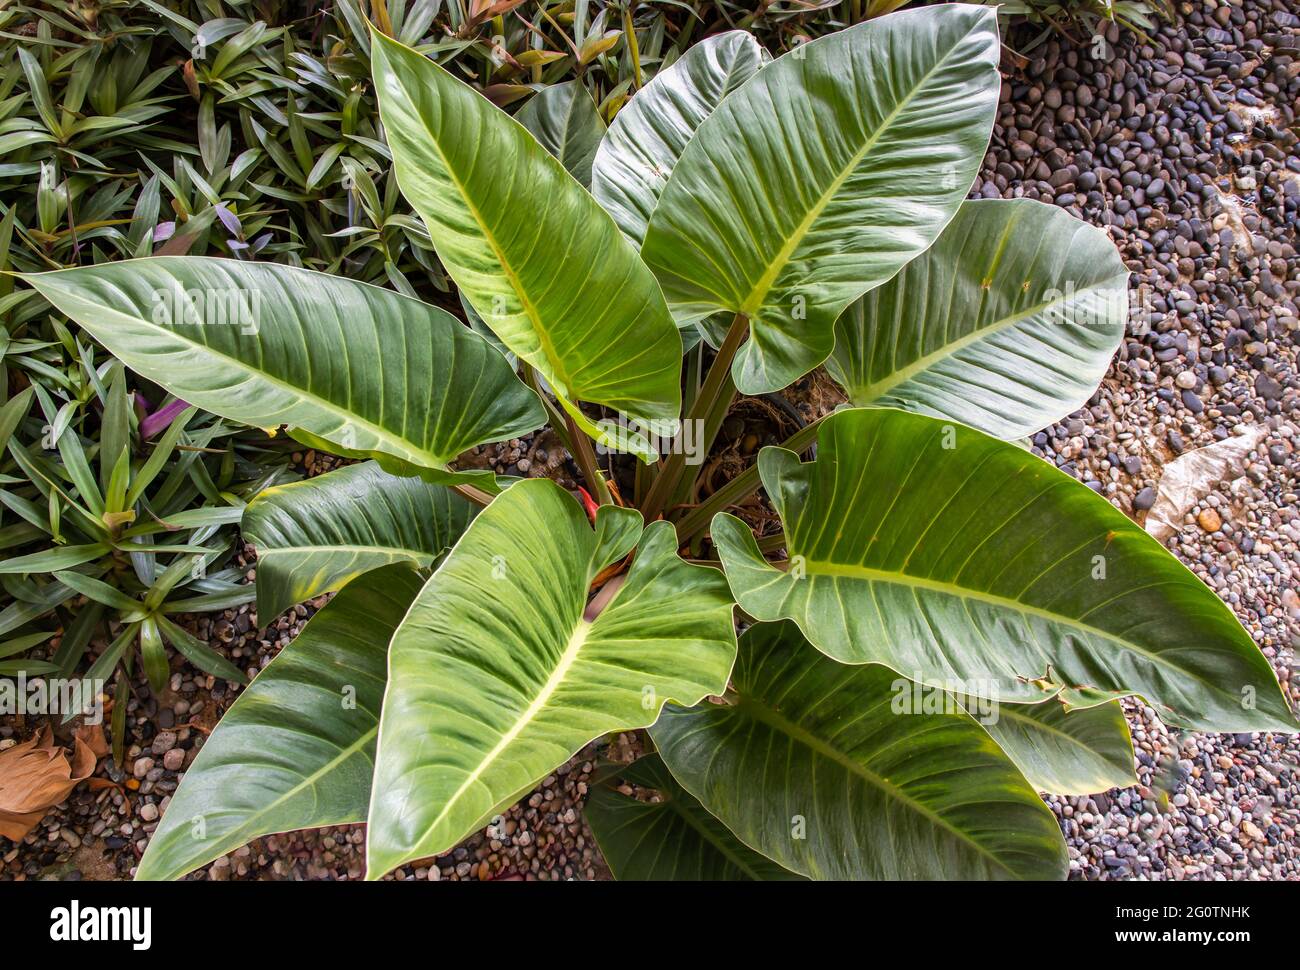 Philodendron leaf (Philodendron melinonii), Large green foliage in garden. Selective focus. Stock Photo